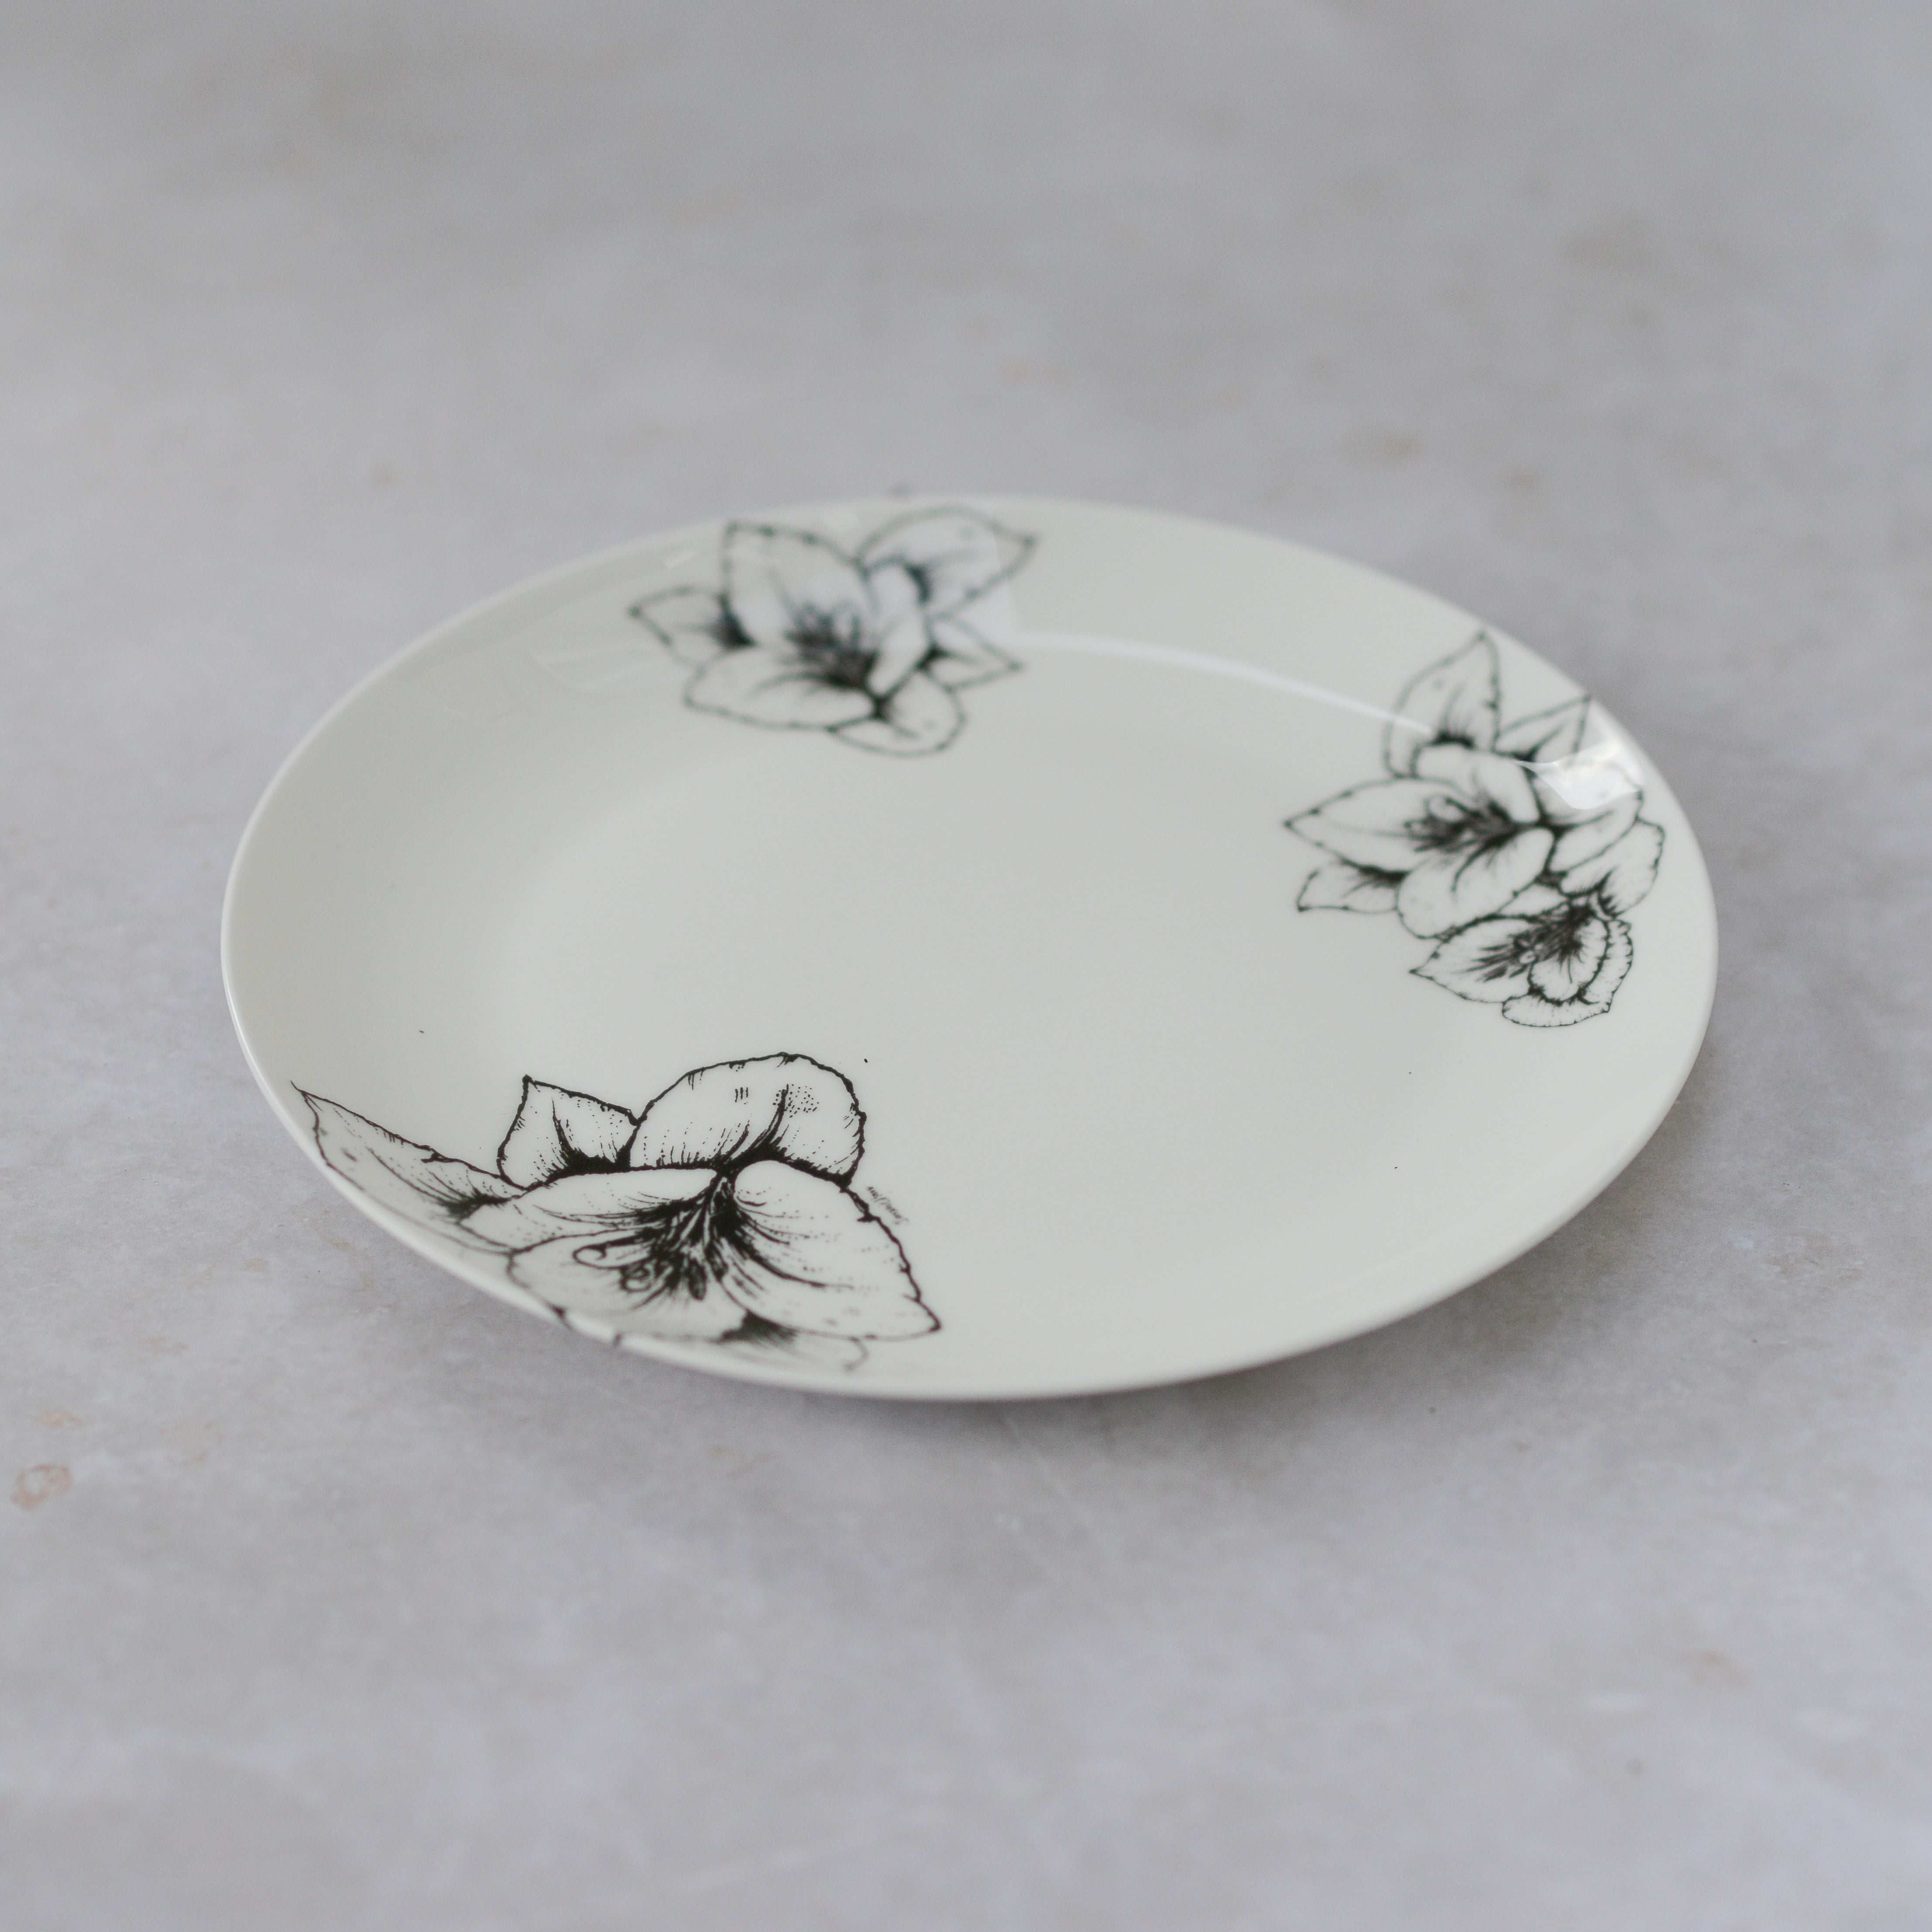 Floral crockery small plate